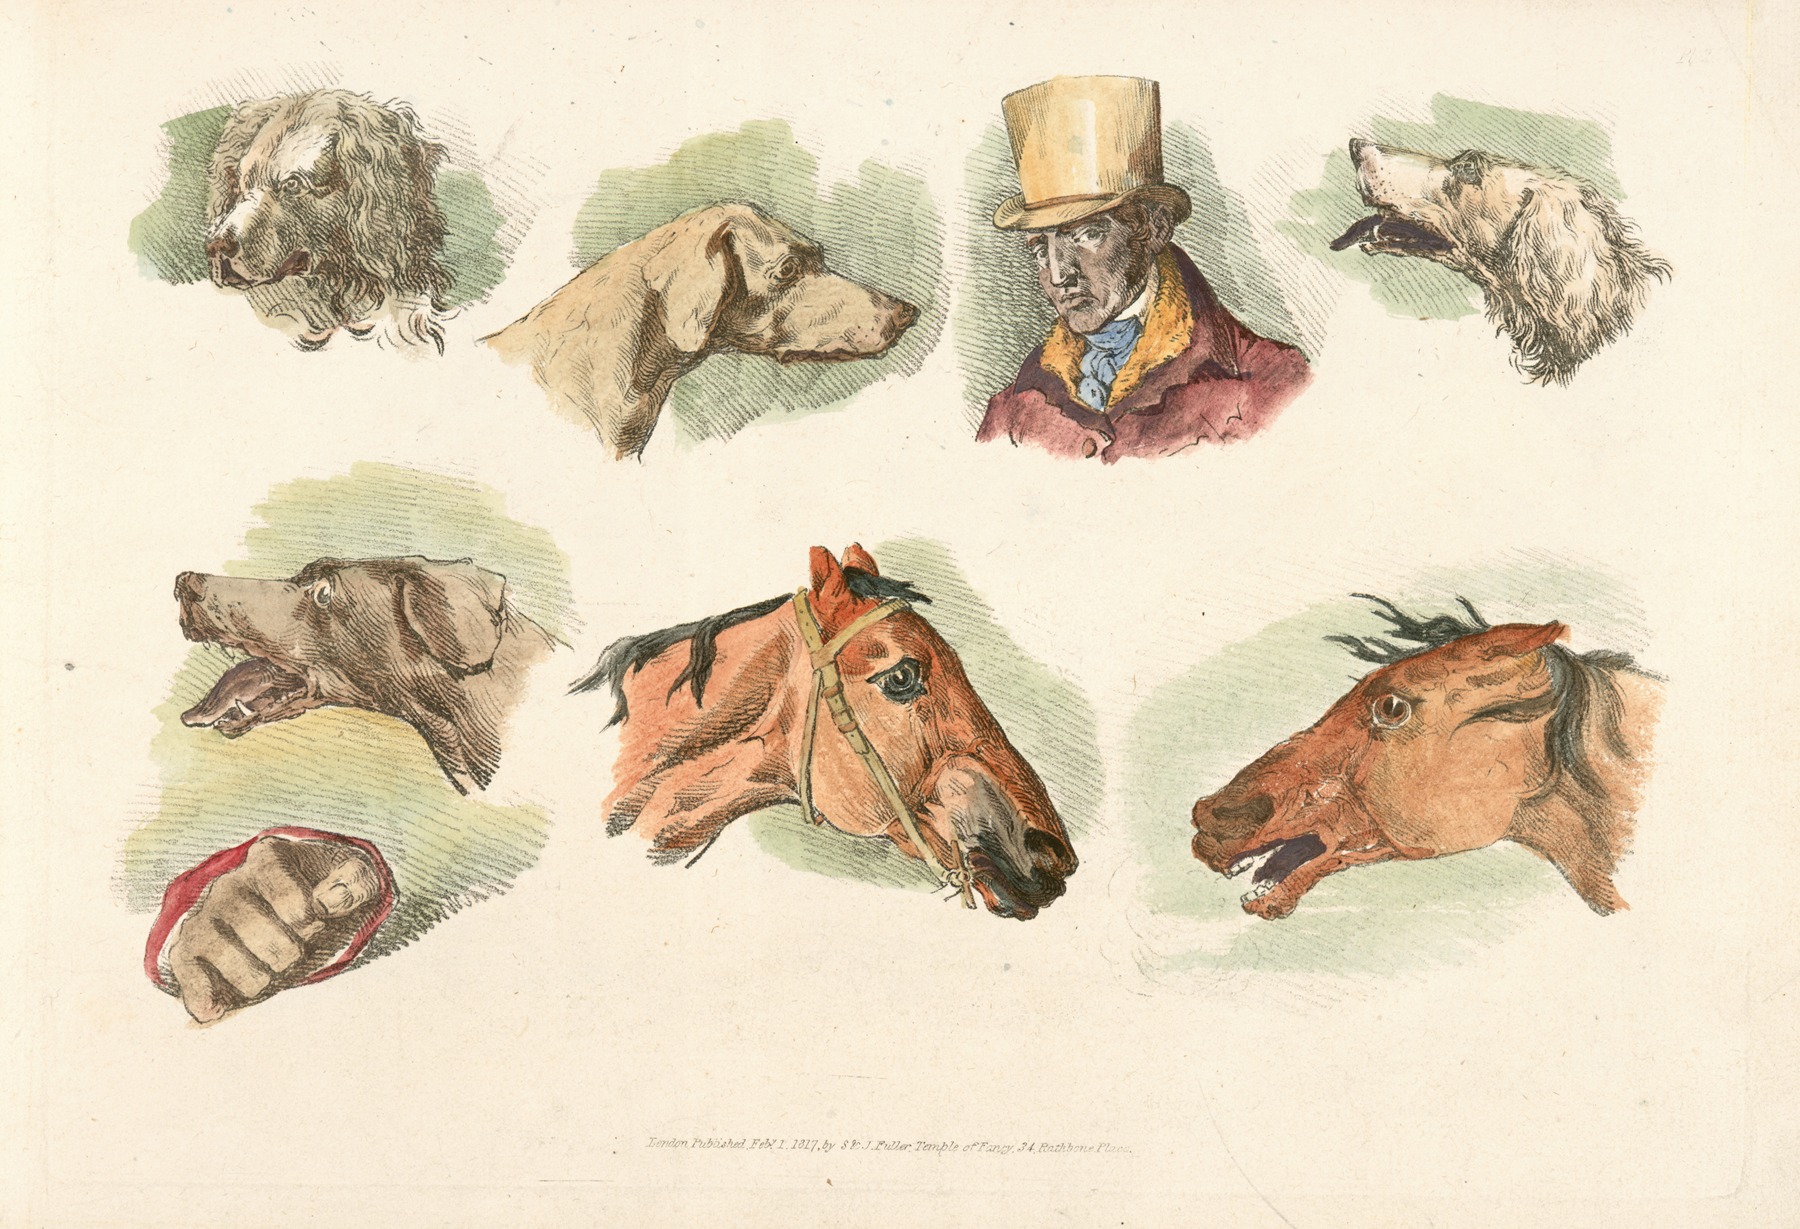 Henry Thomas Alken - Heads of dogs, horses and of a man